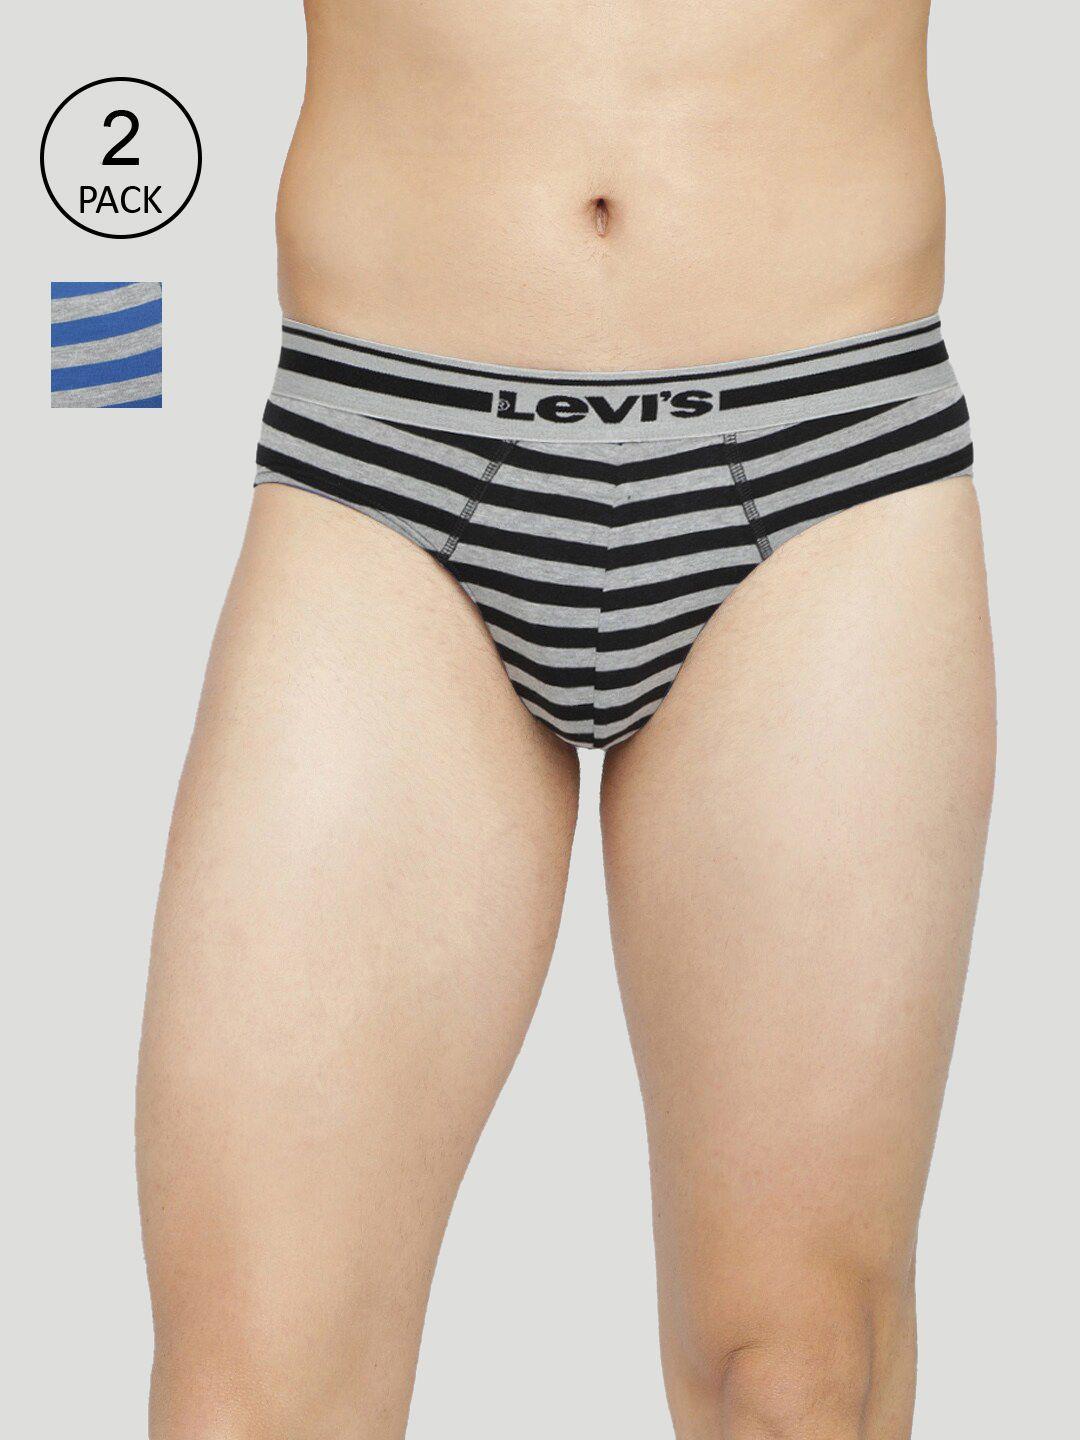 levis pack of 2 smartskin technology striped briefs with tag free comfort #005